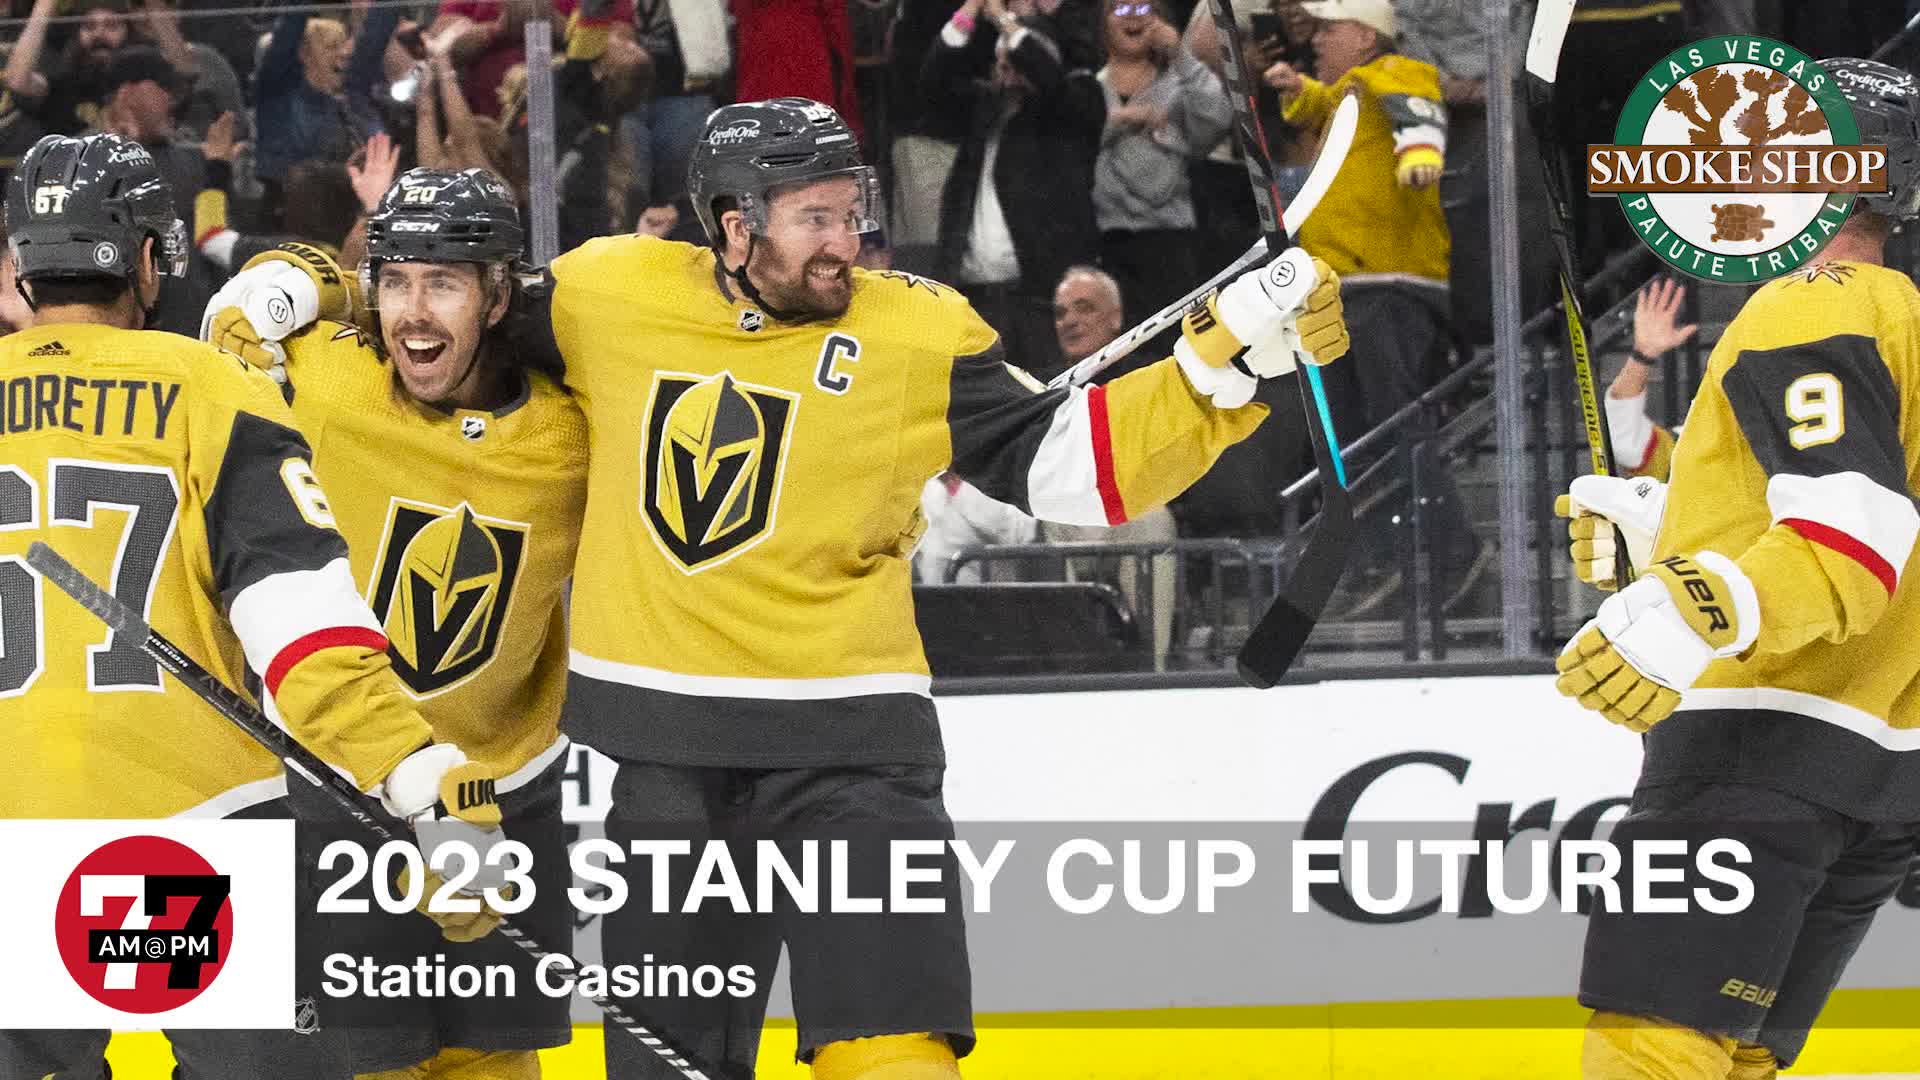 2023 Stanley Cup Futures